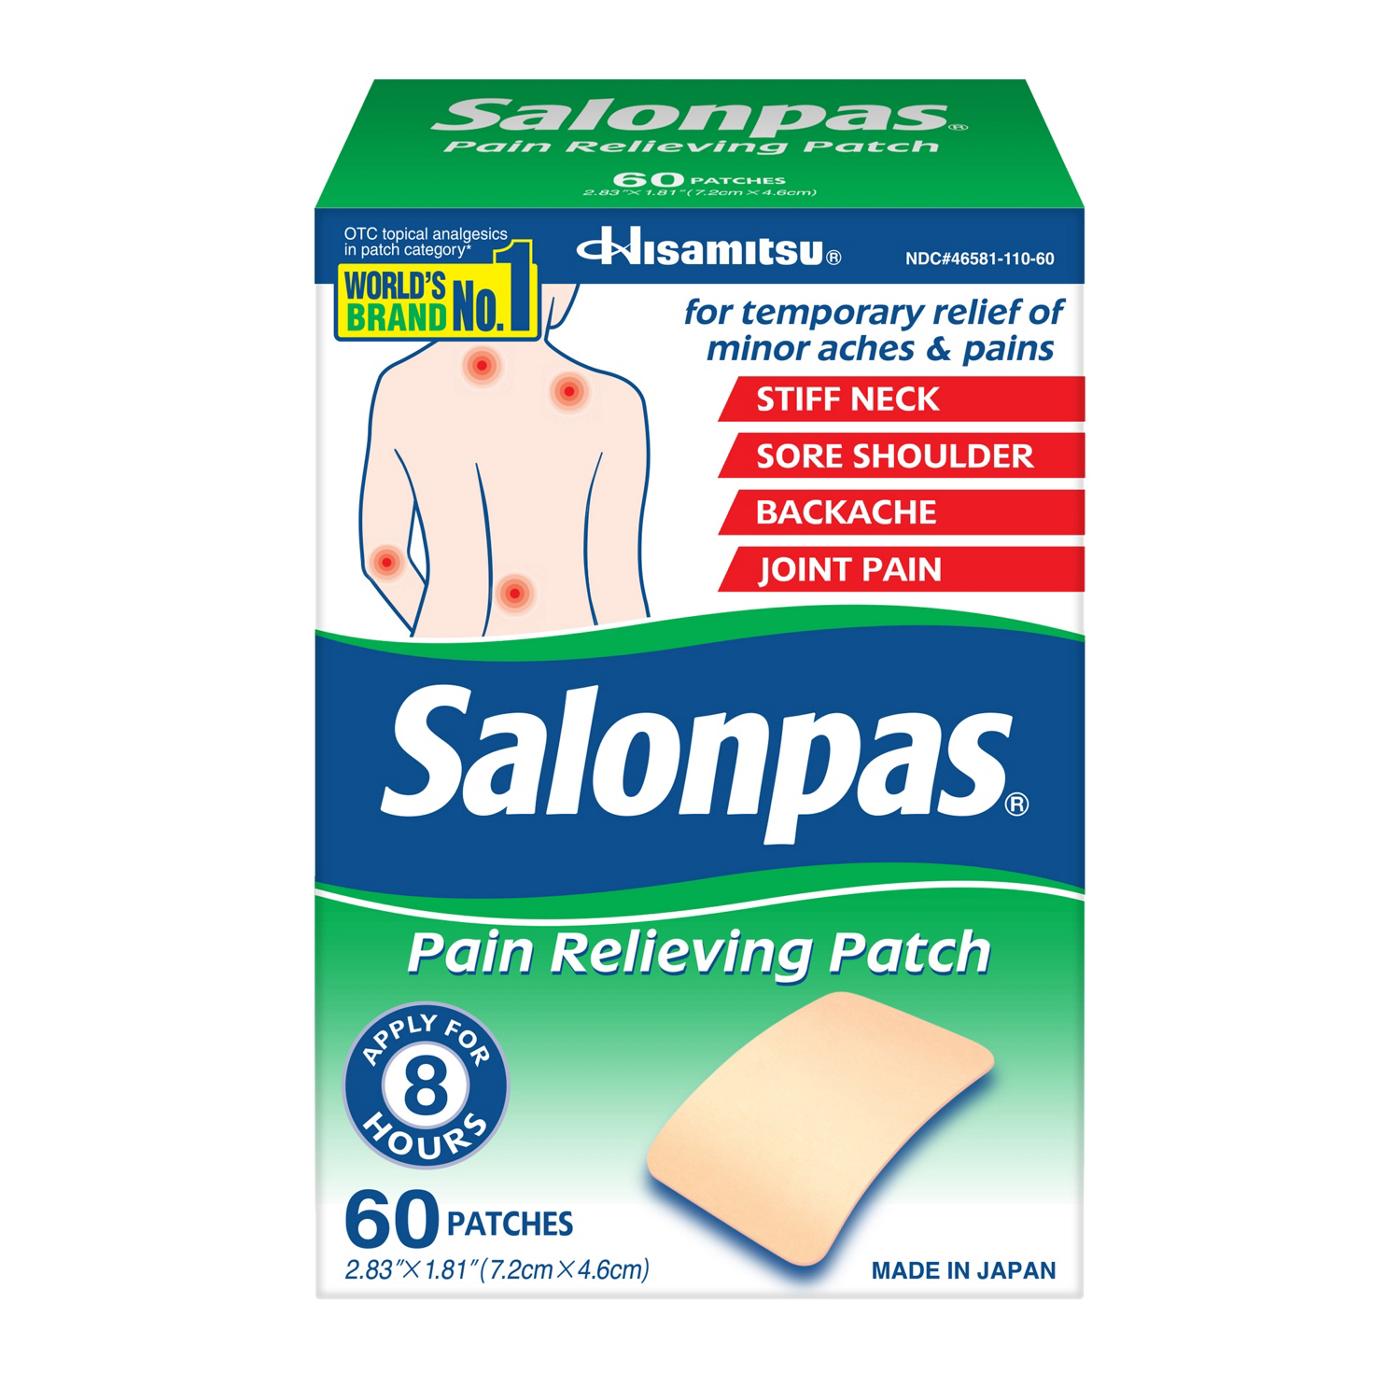 Salonpas Pain Relieving Patch; image 1 of 6